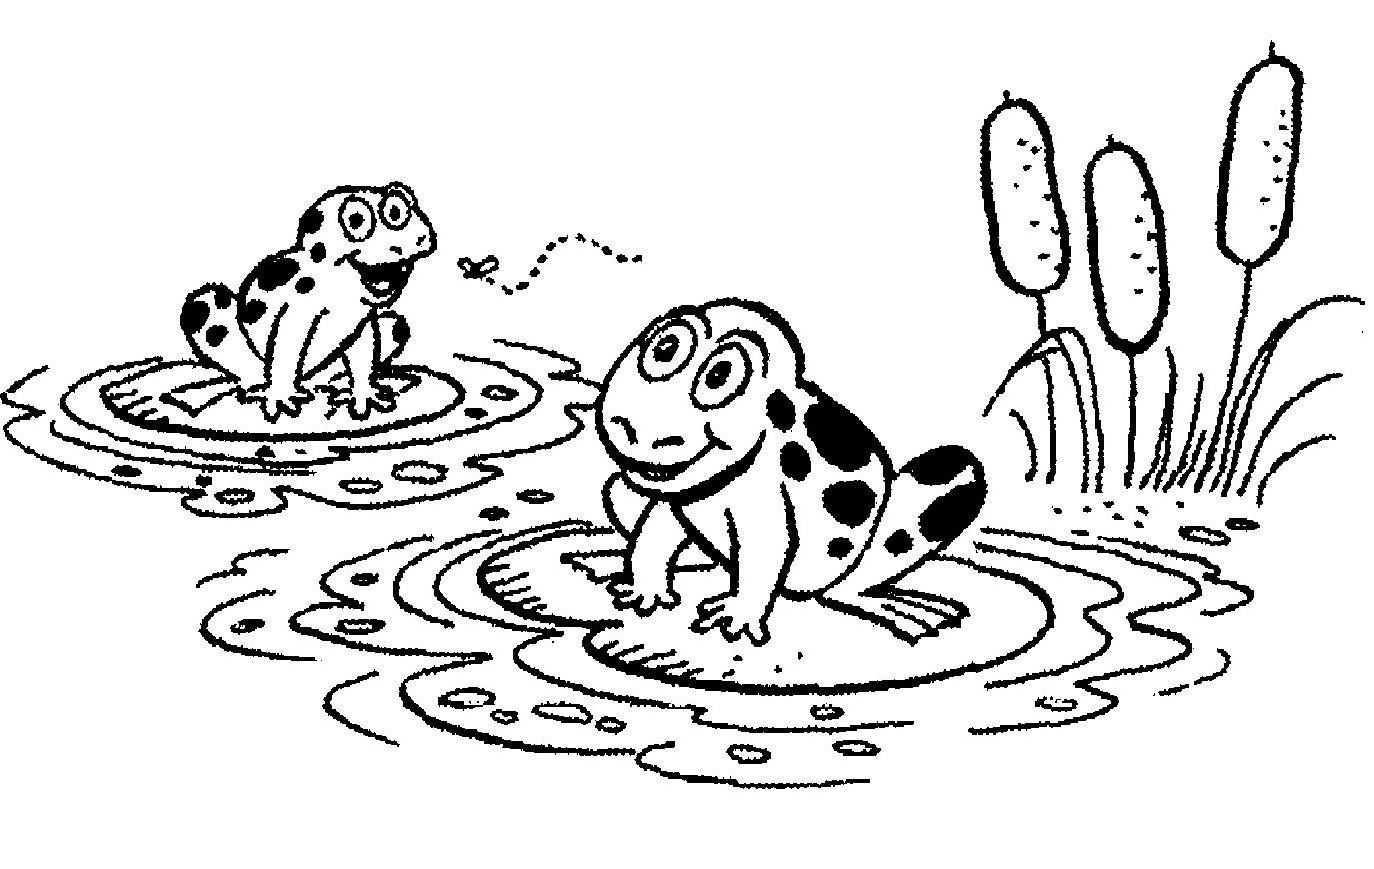 Frog black and white frog clipart black and white 2